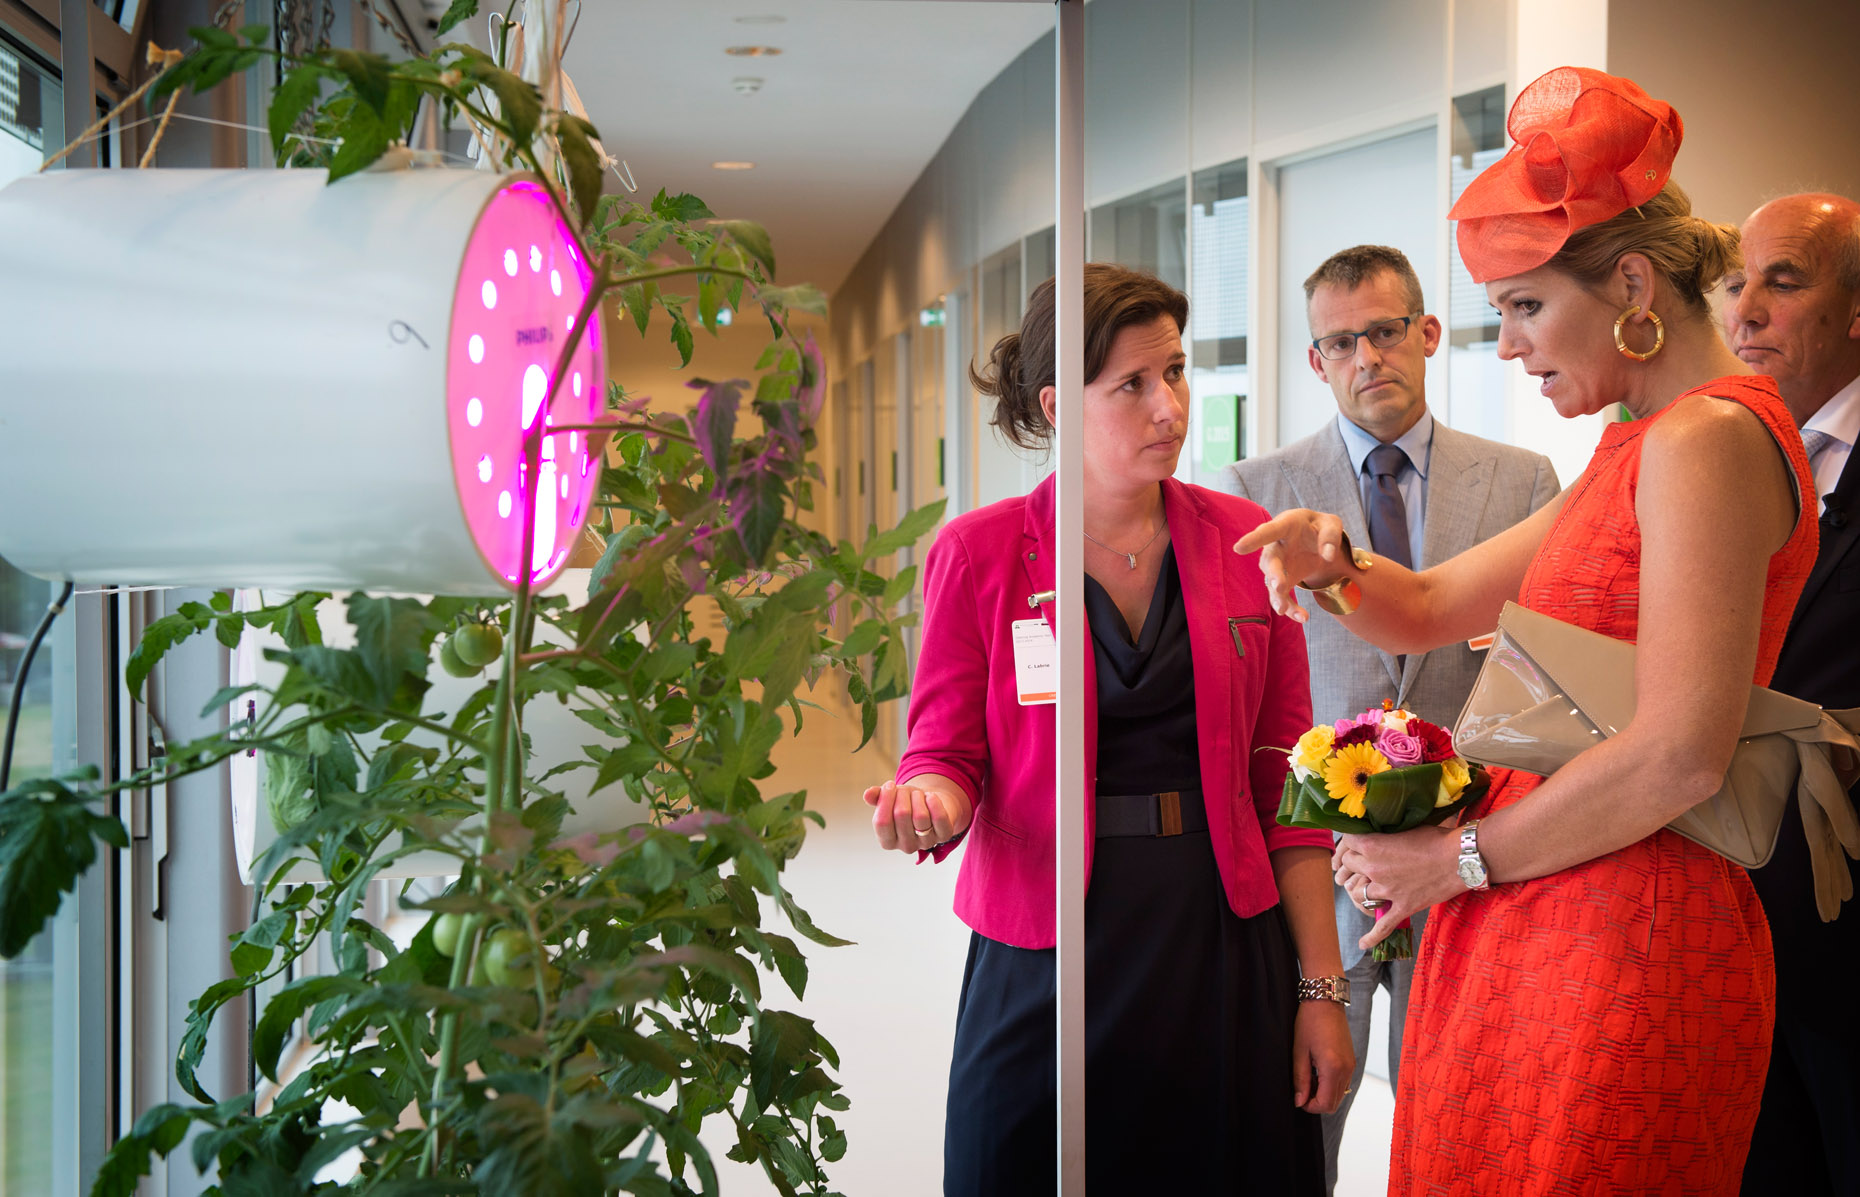 Queen_Maxima_during_the_opening_of_the_Academic_Year_in_Wageningen